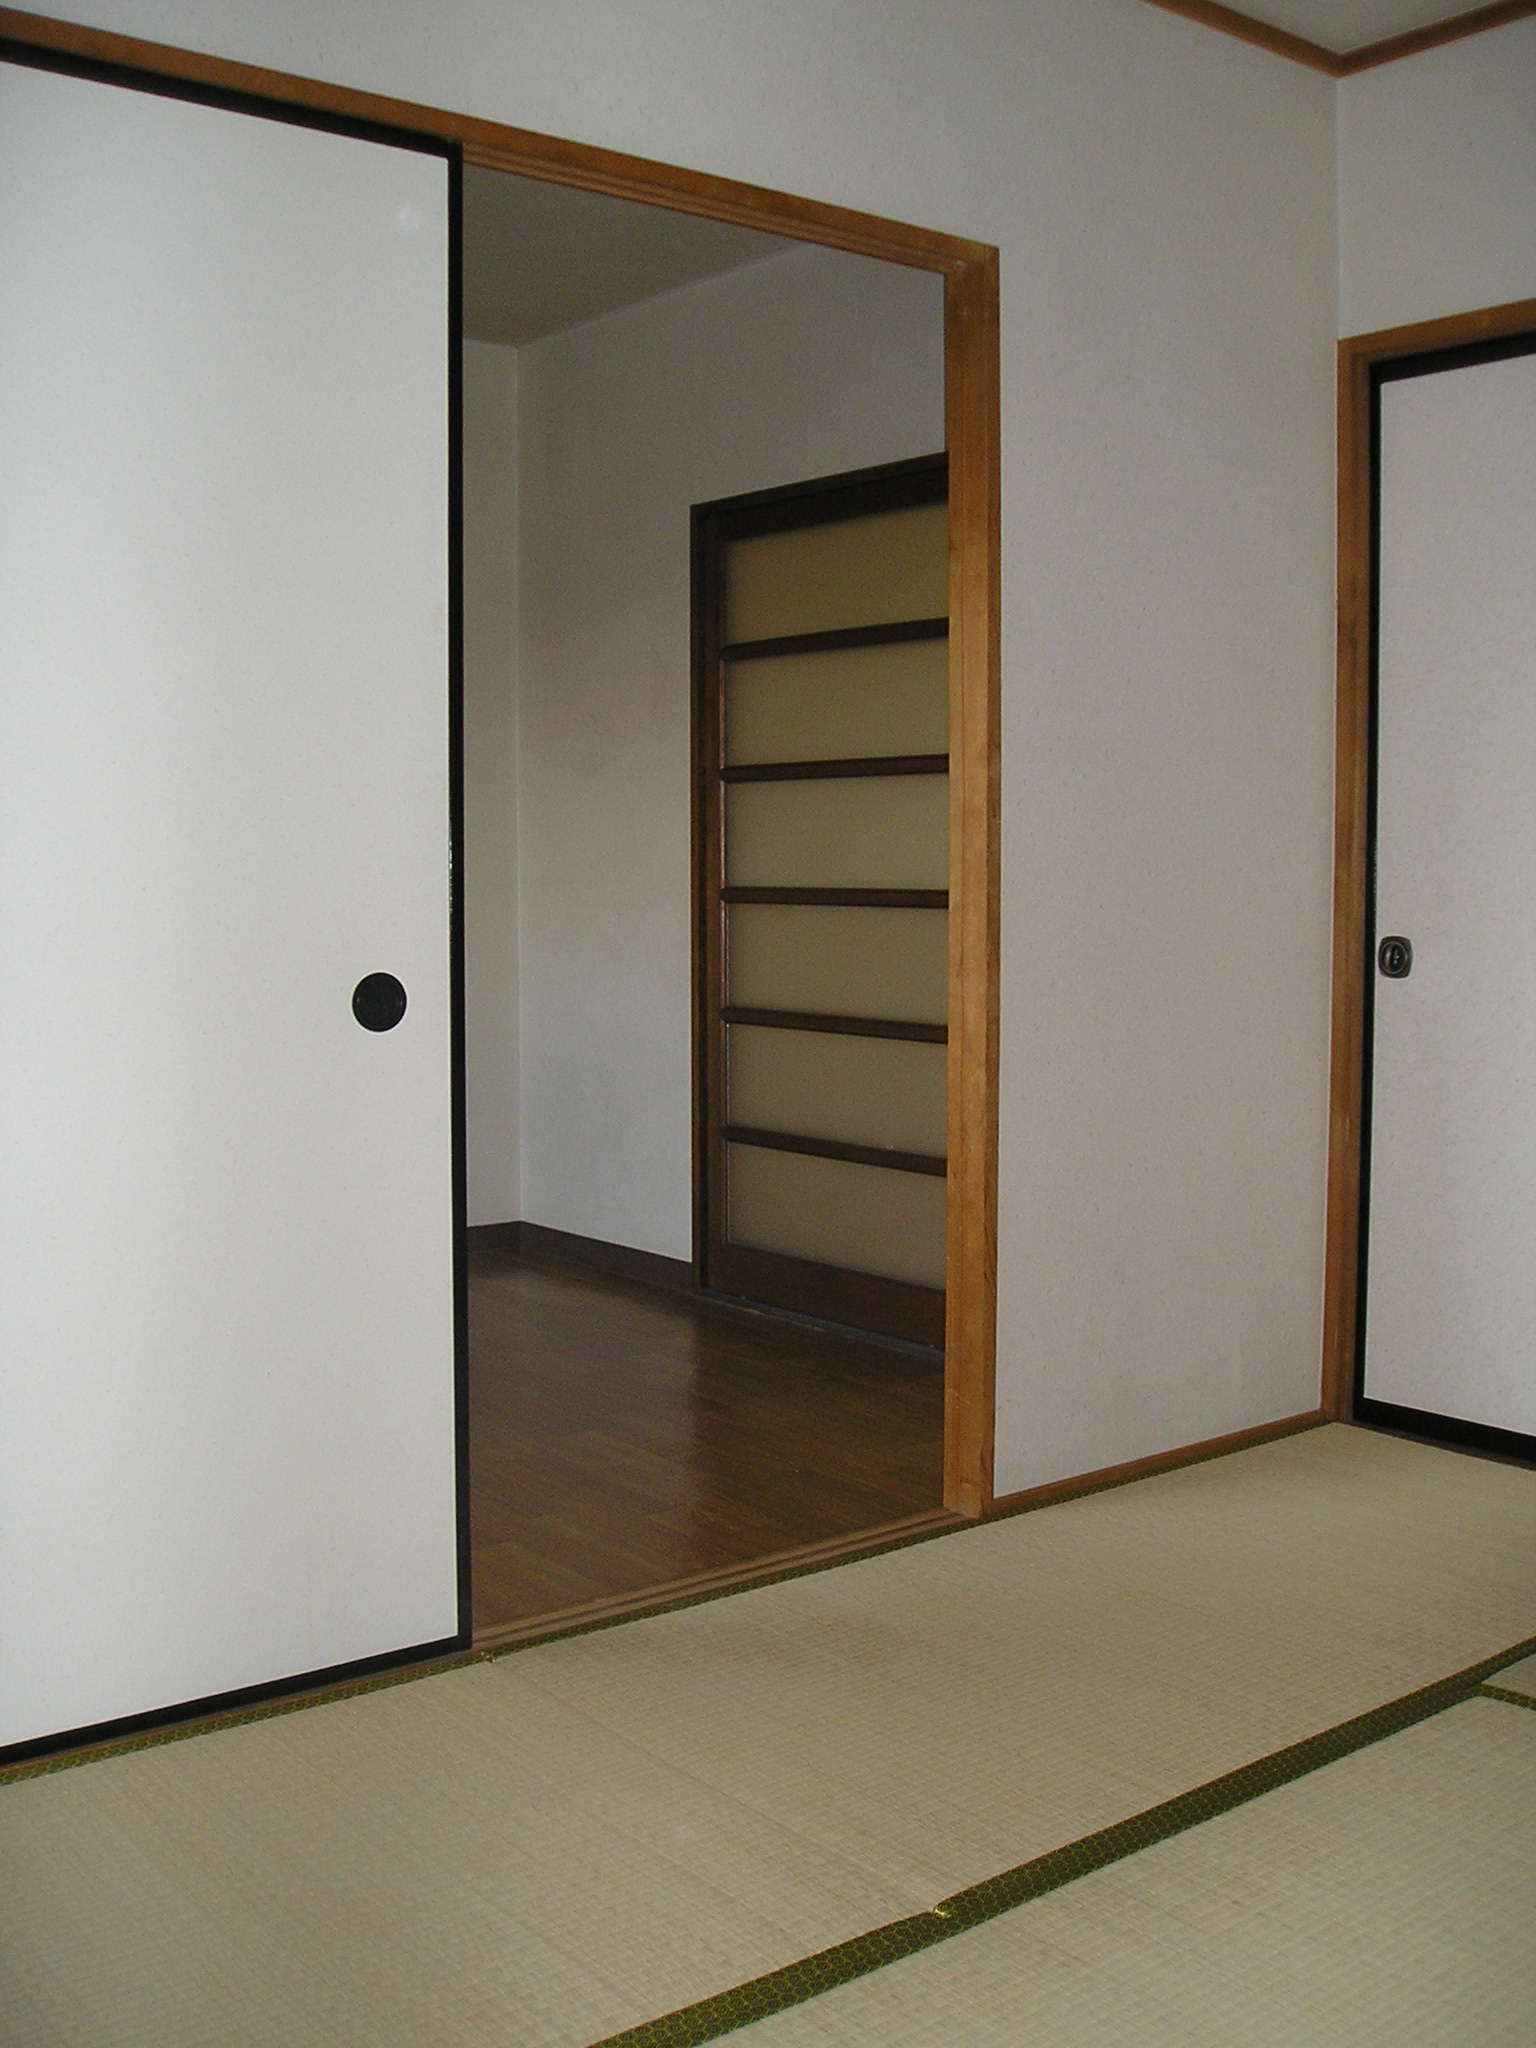 Other room space. From Japanese-style rooms to Western-style